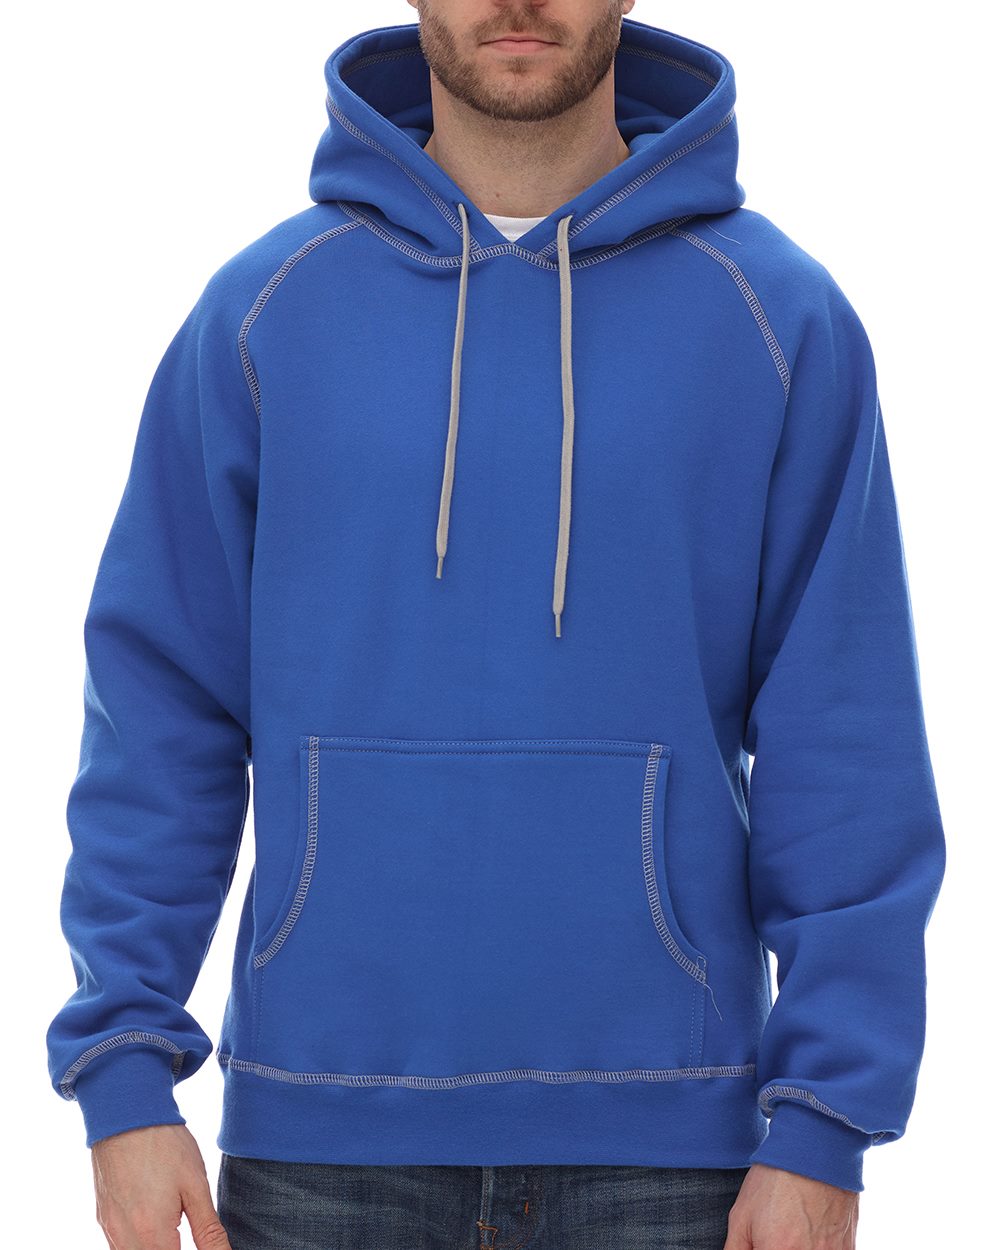 King Fashion Extra Heavy Hooded Pullover - KP8011 - Wescan